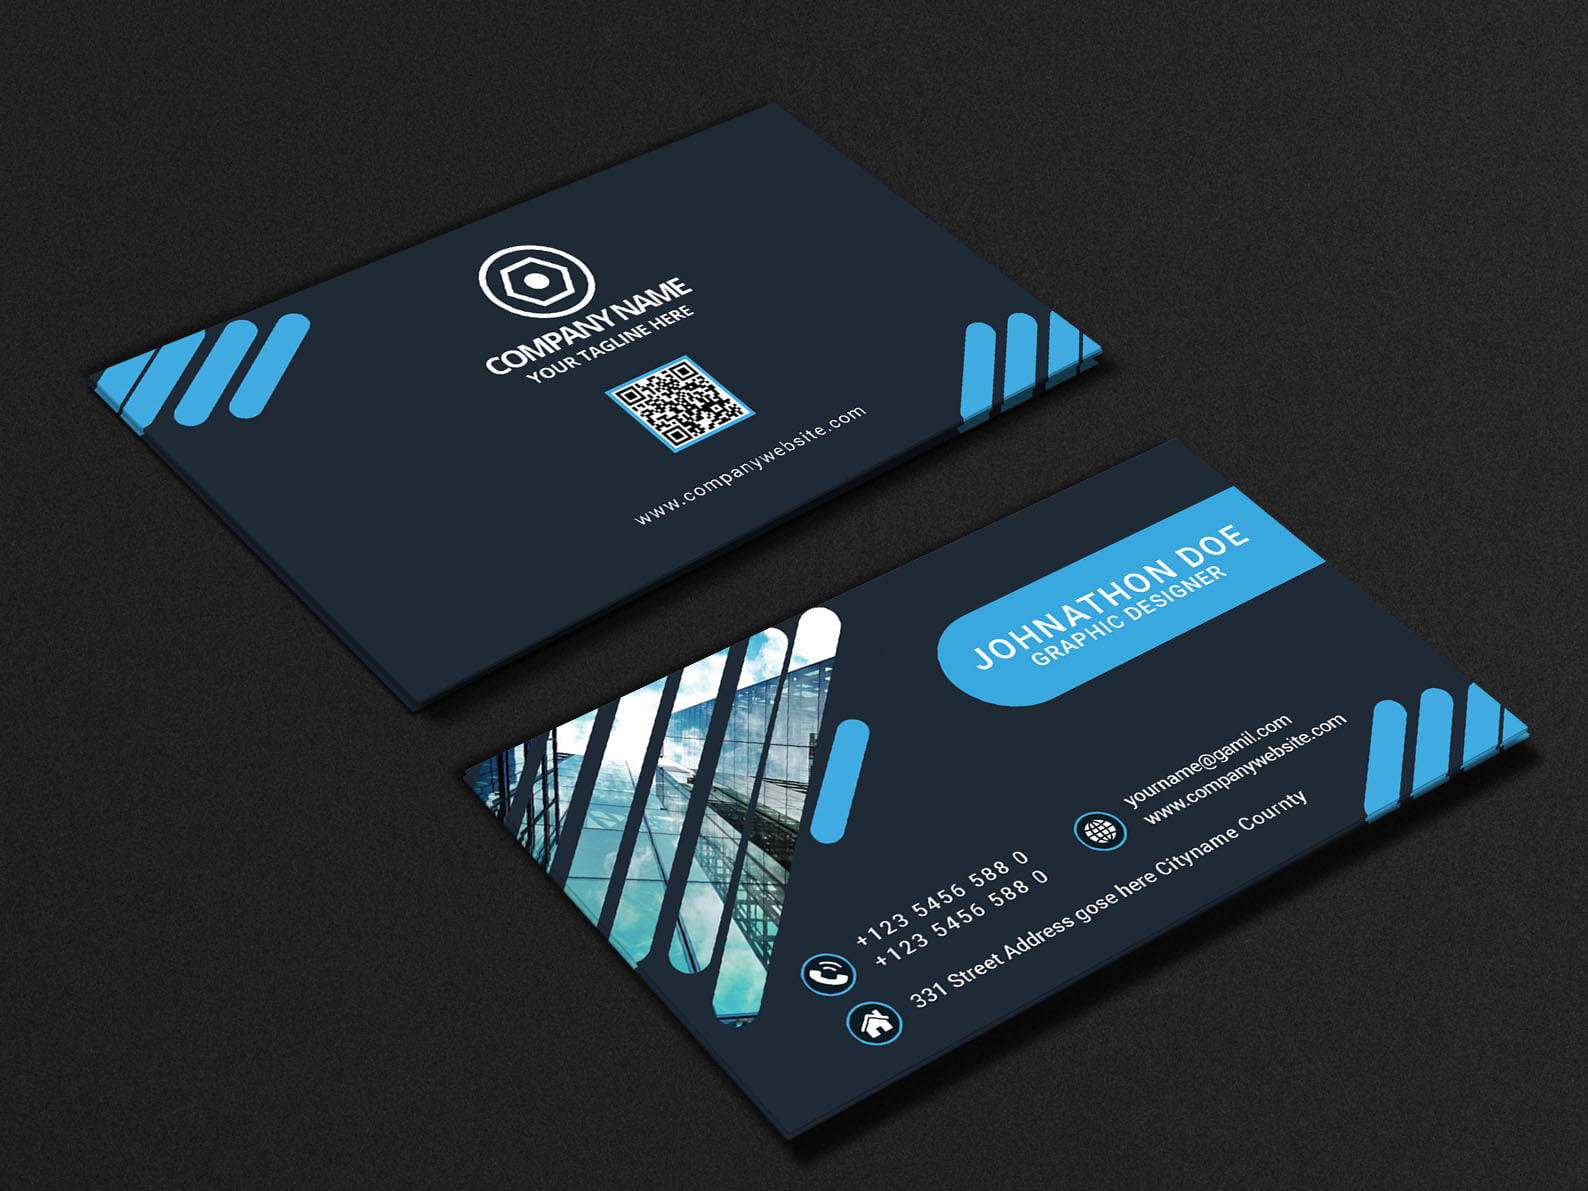 I will design an outstanding business card